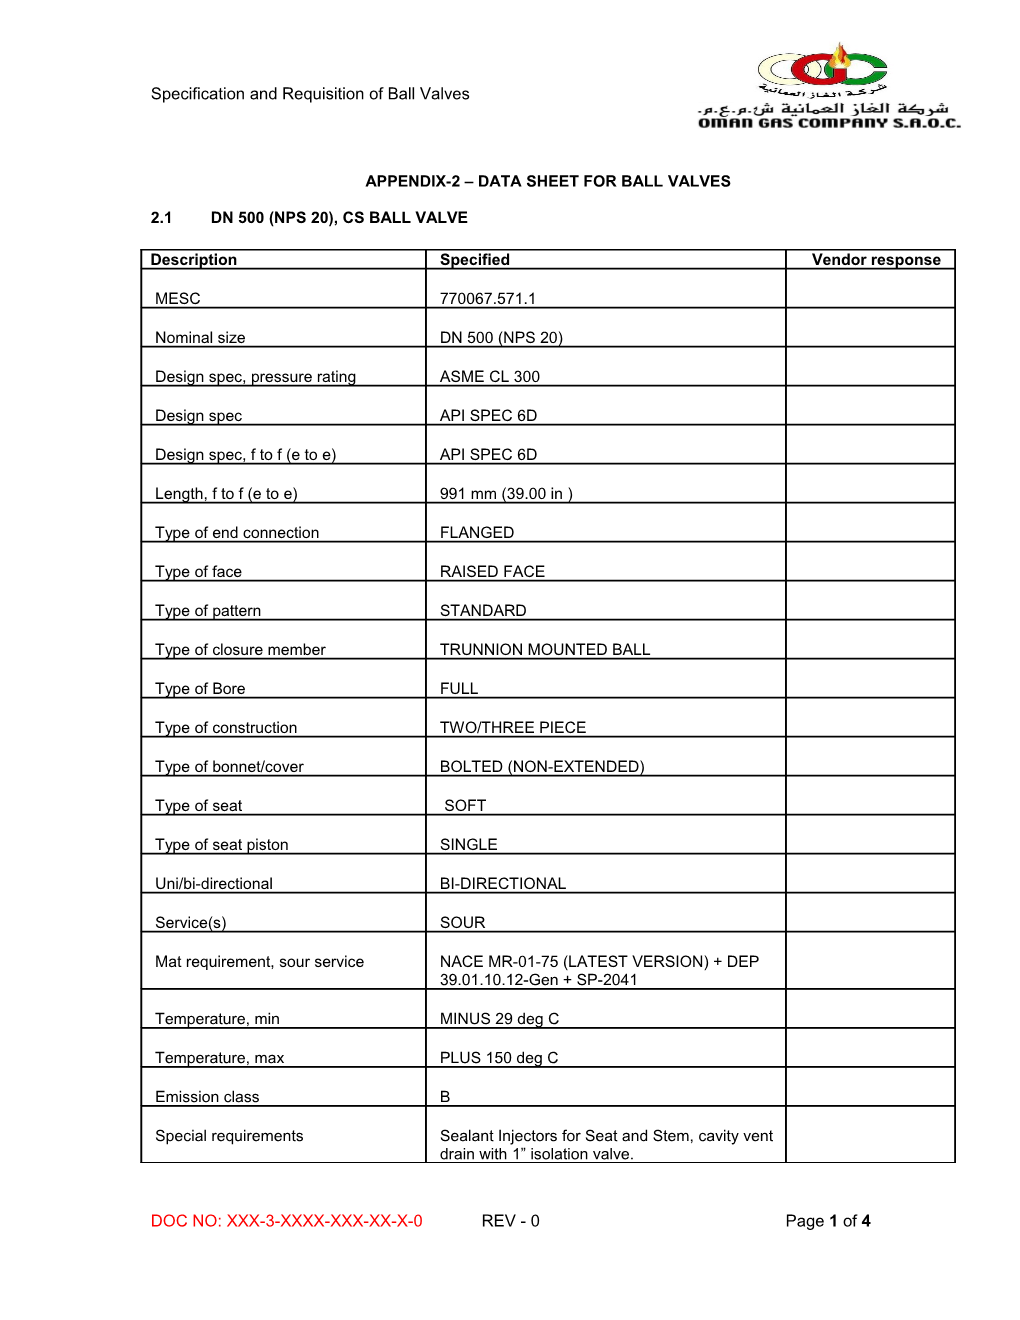 Data/Requisition Sheet For